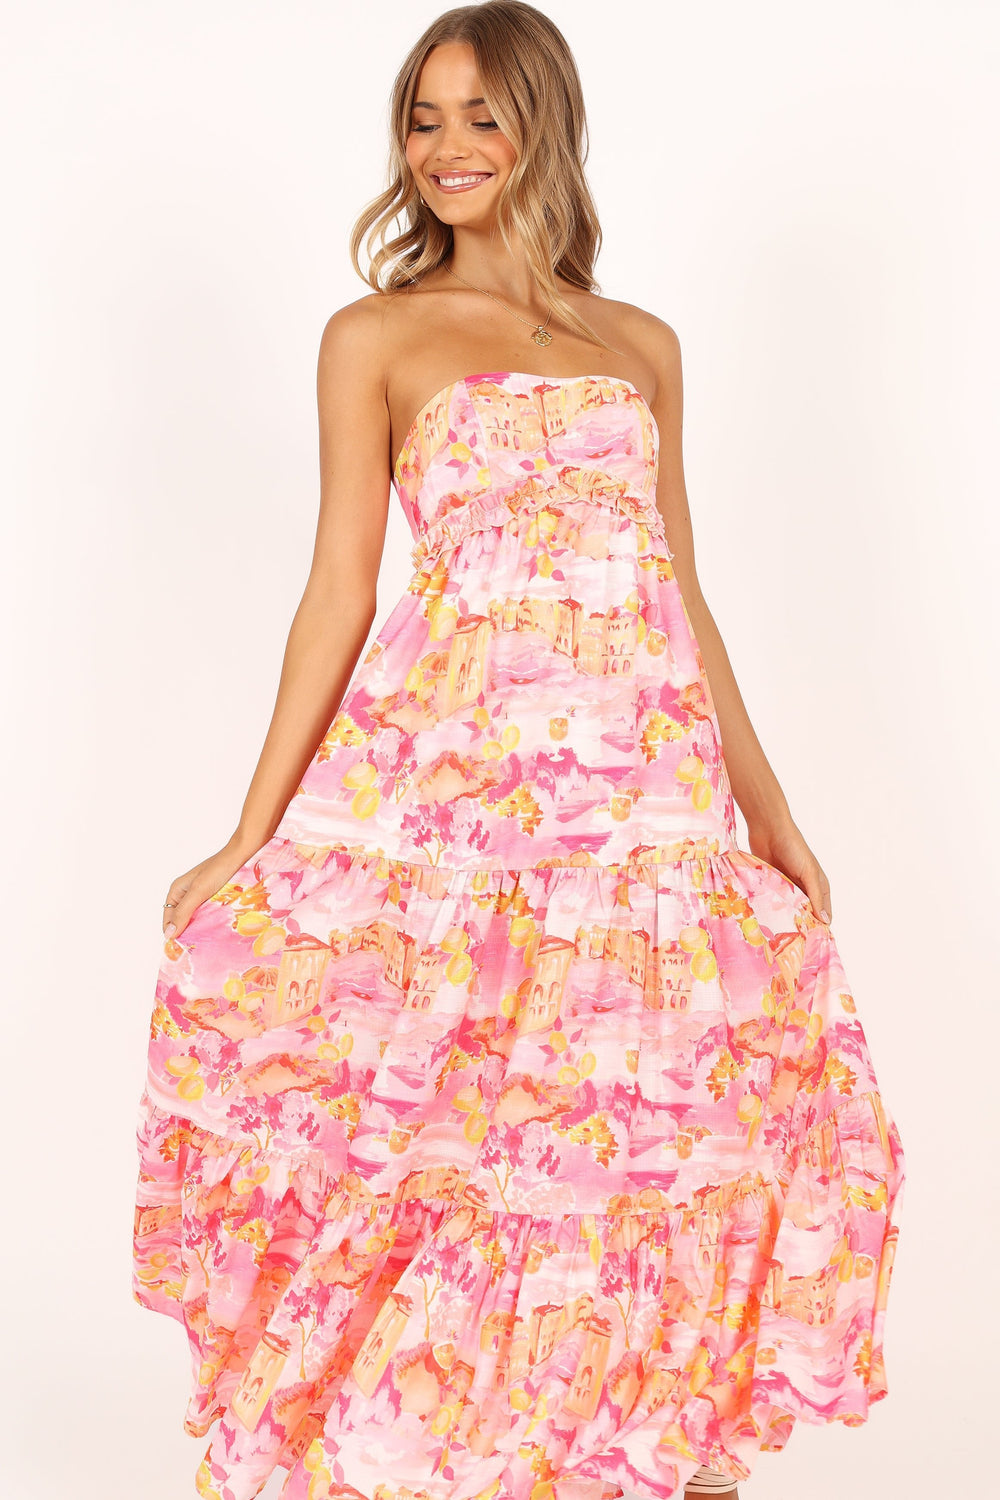 Petal and Pup USA DRESSES Arianna Strapless Dress - Pink Scenic